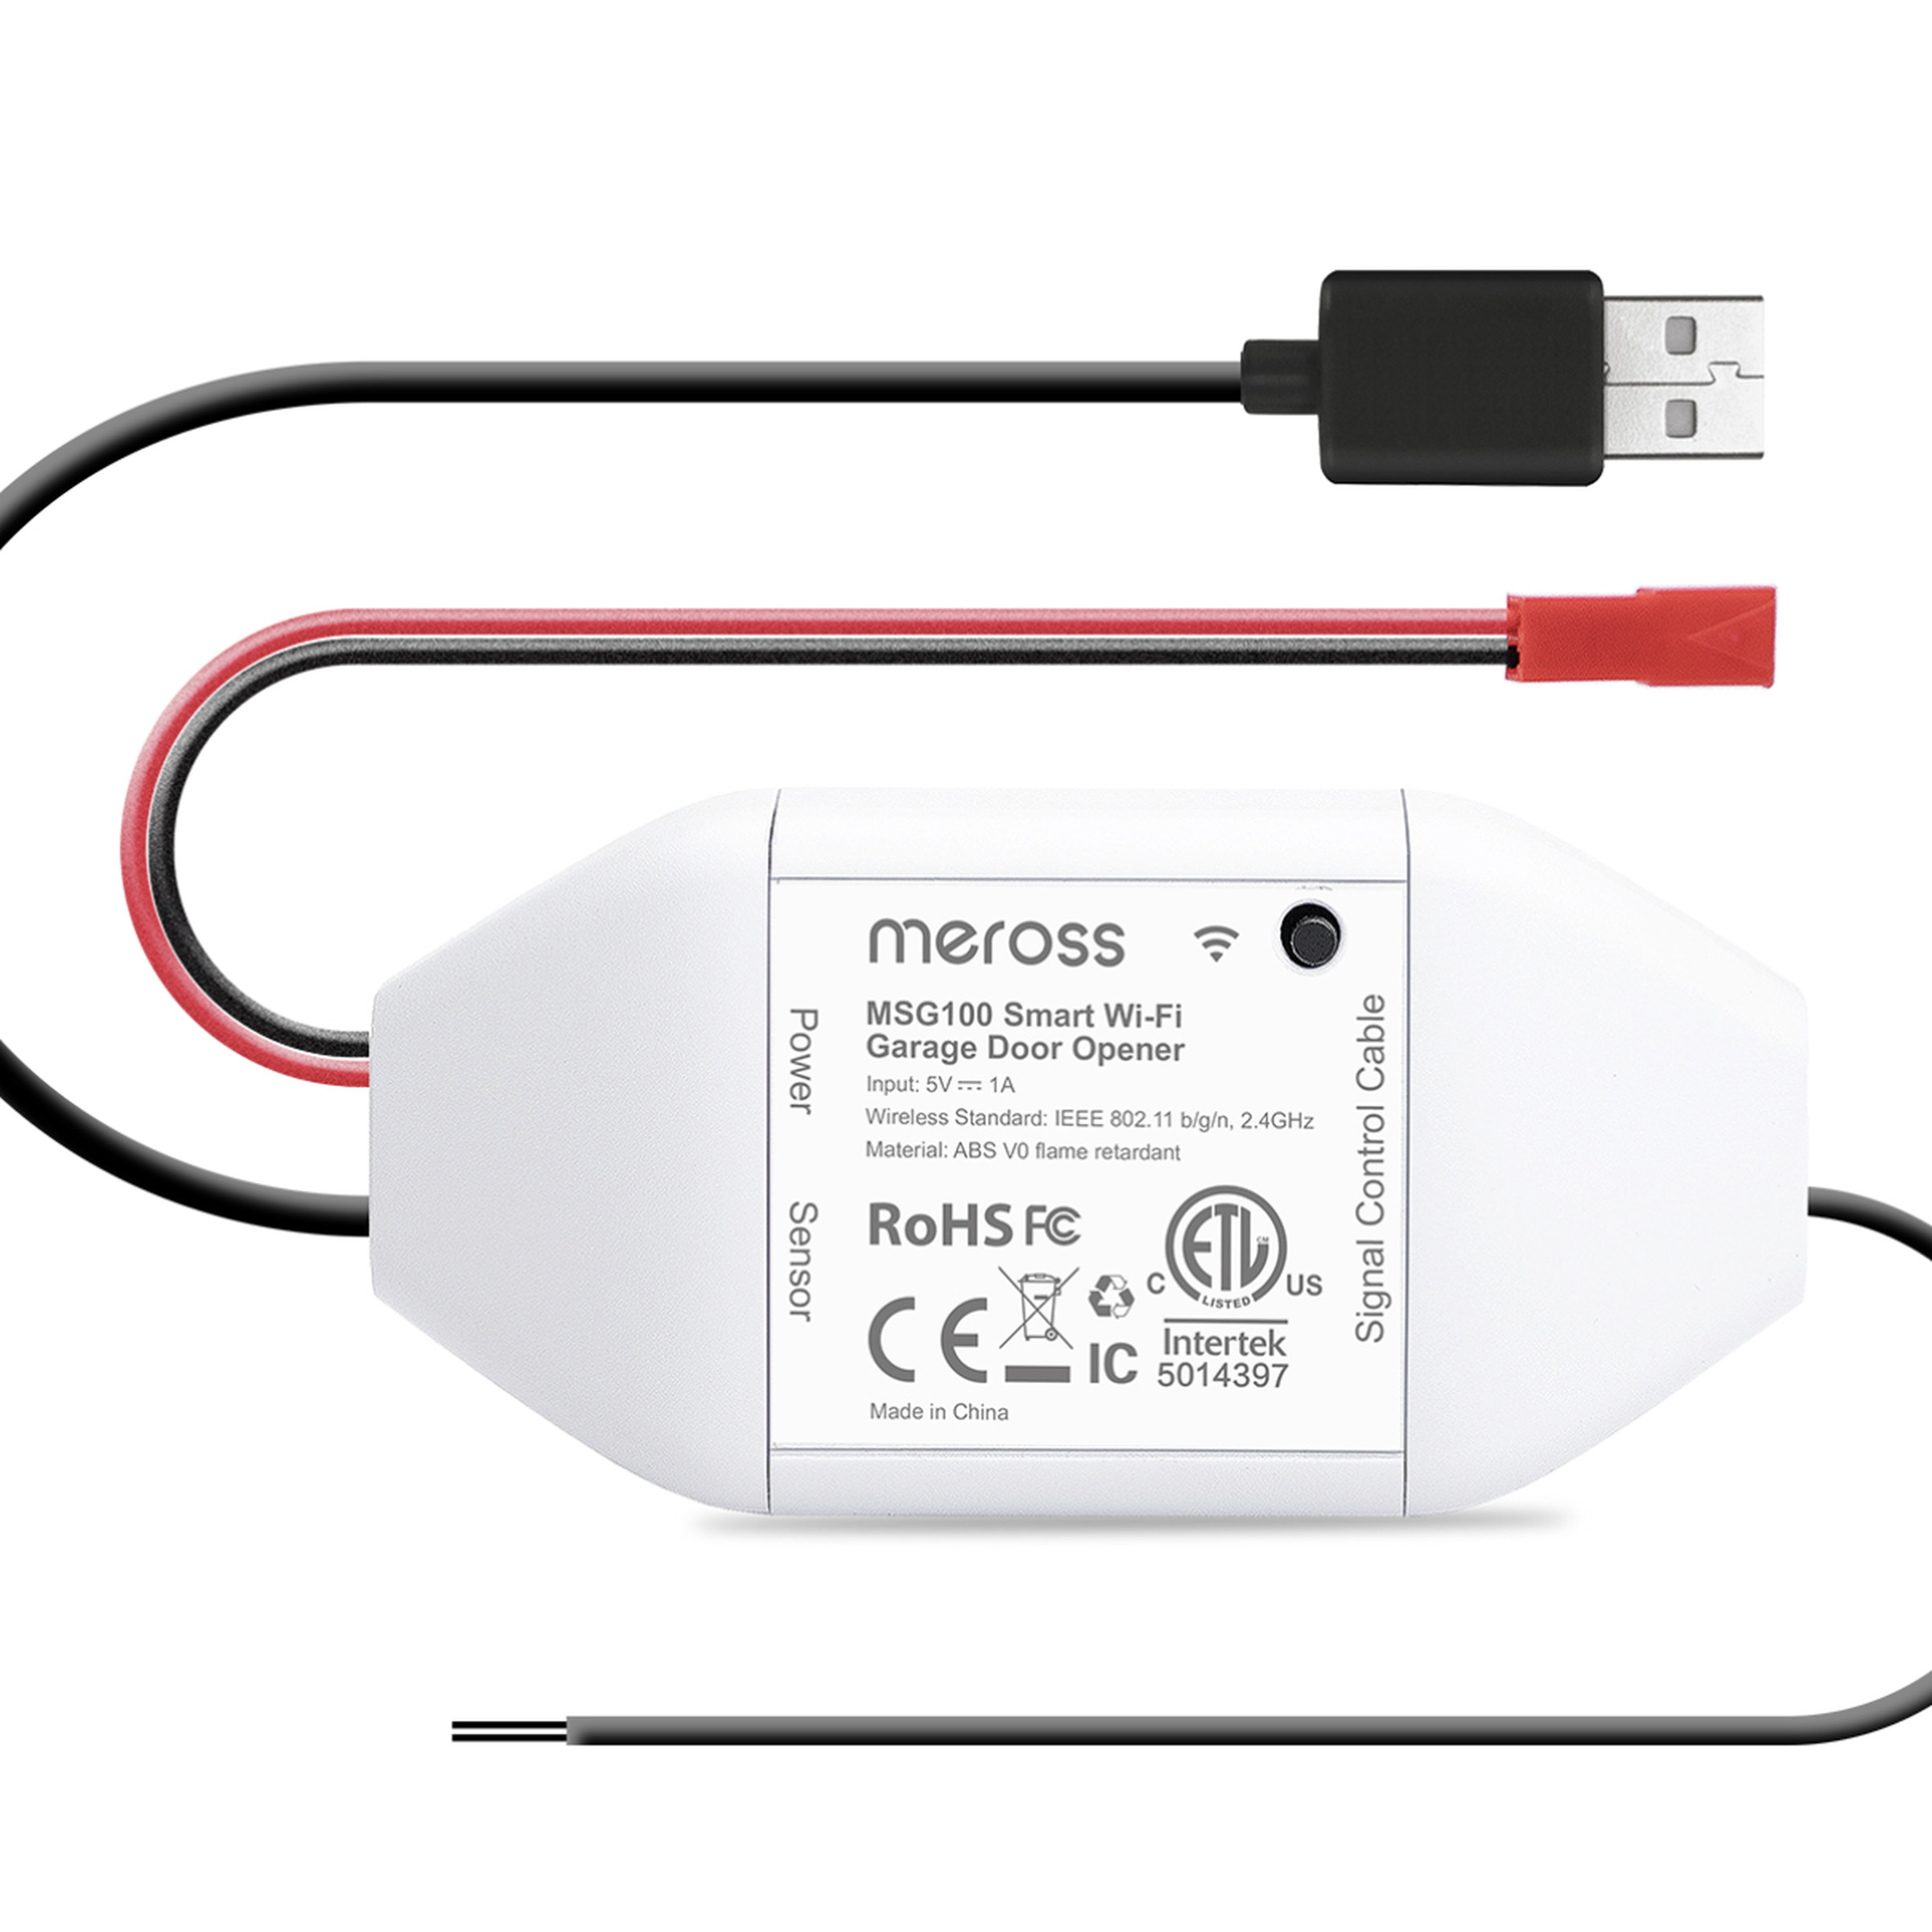 White device labeled Meross with black and red wires coming out